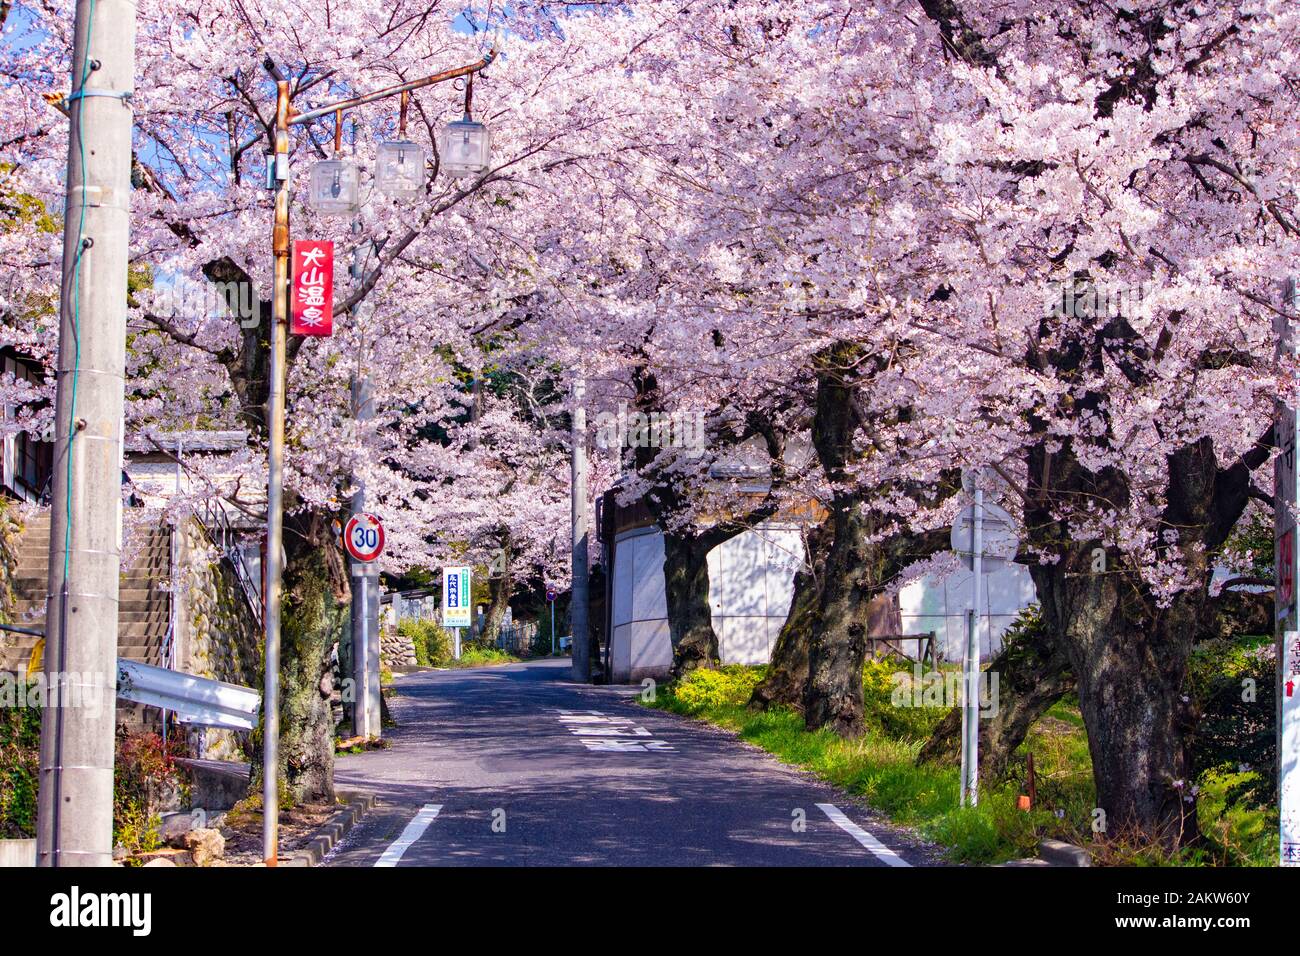 Street in Japan lined with cherry blossom trees in full bloom Stock Photo